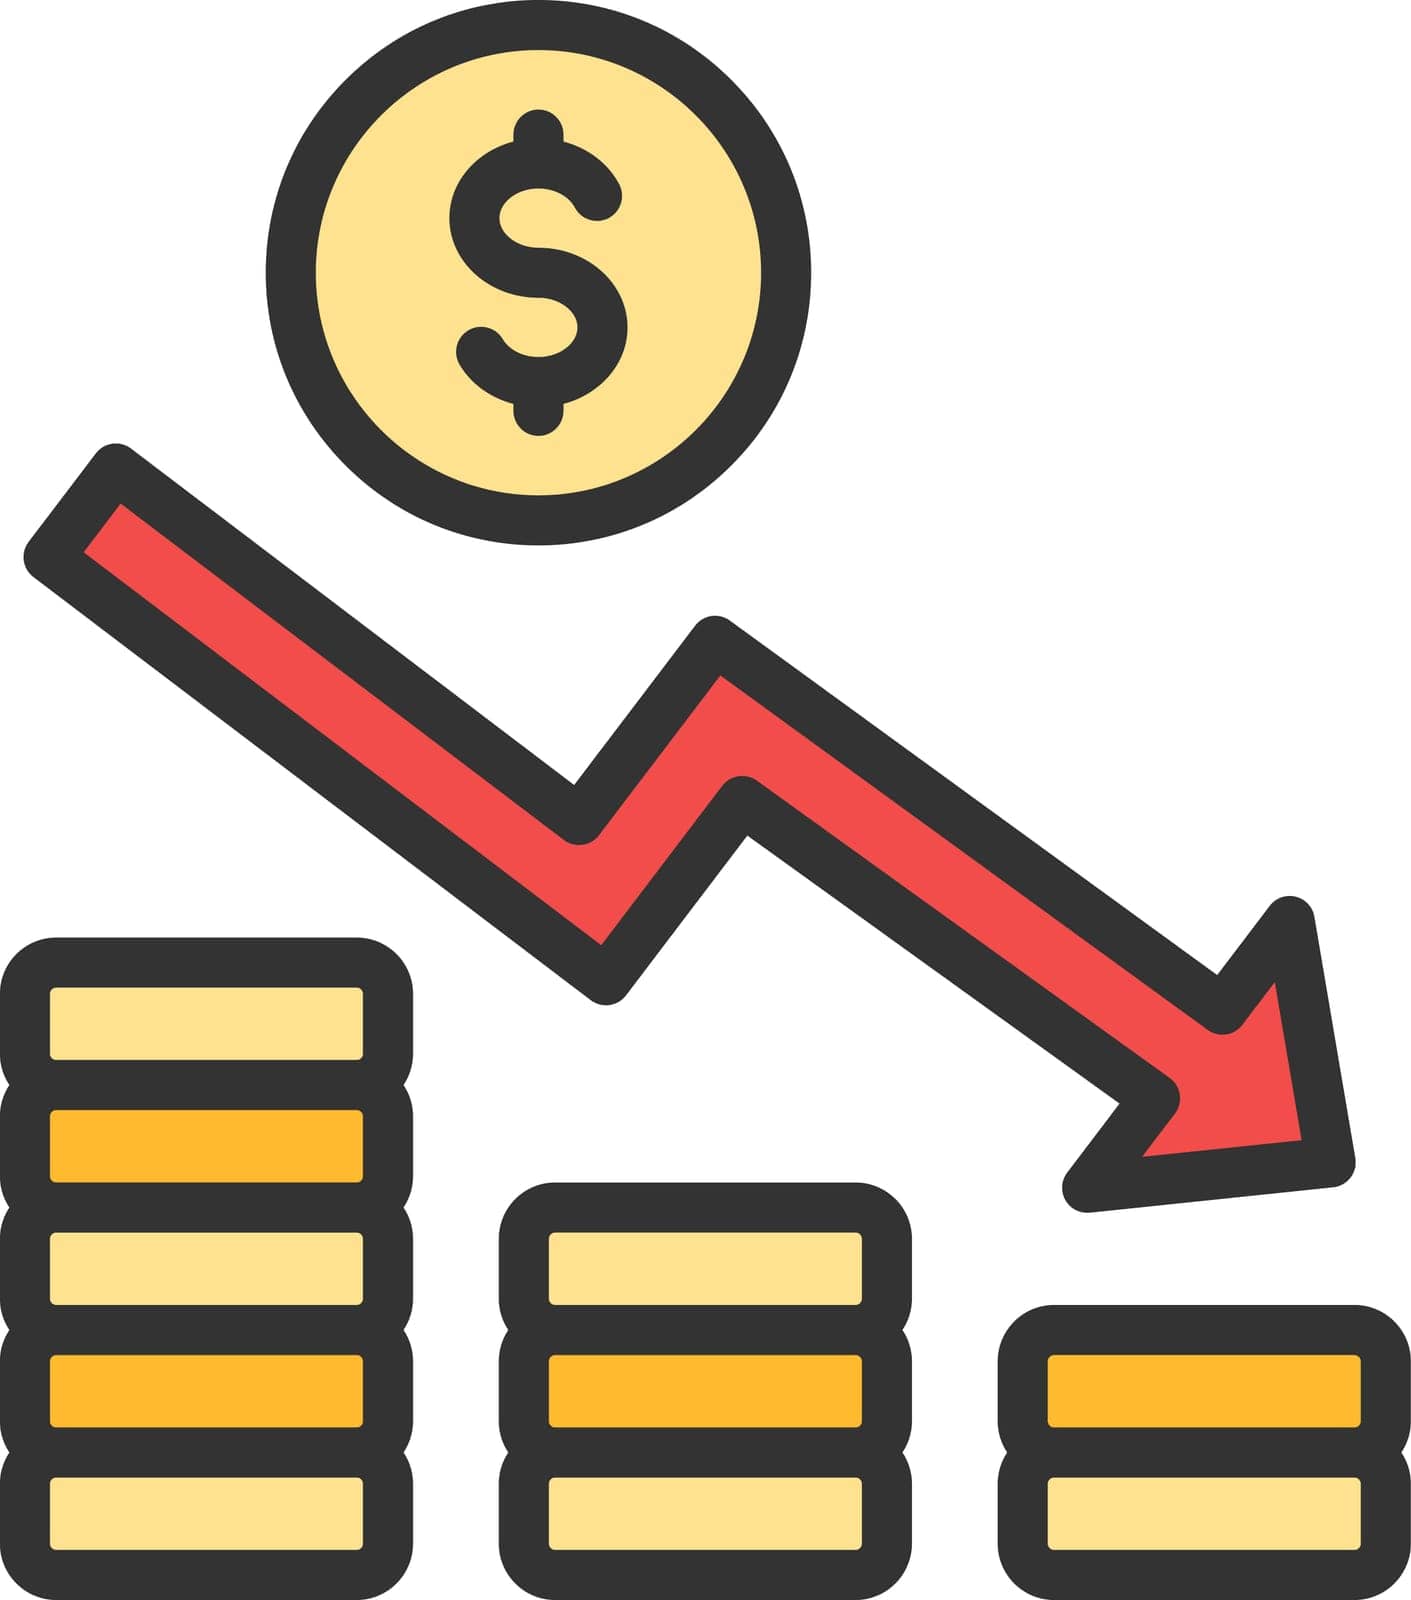 Economic Crisis icon vector image. Suitable for mobile application web application and print media.